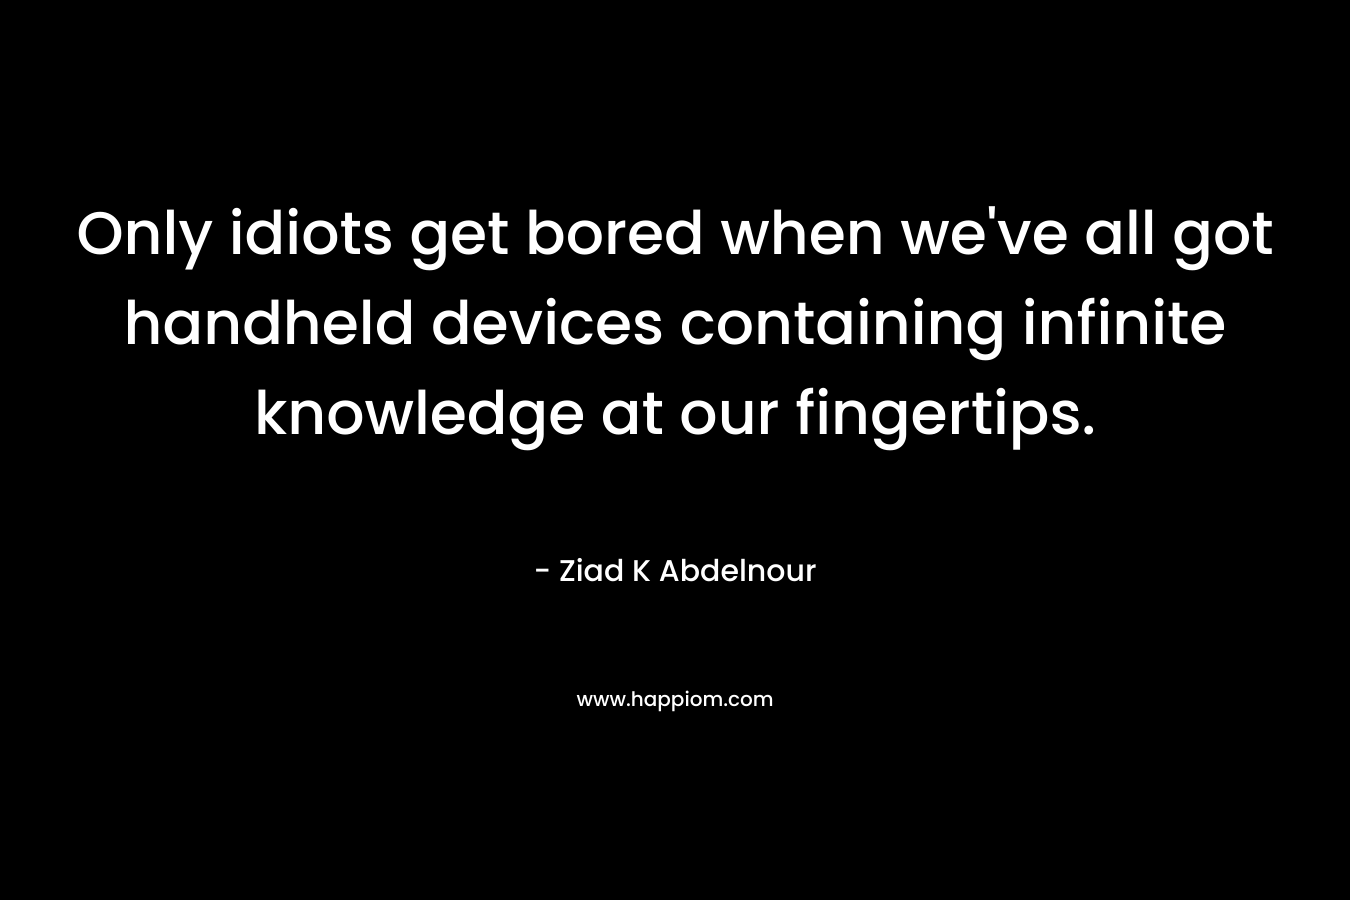 Only idiots get bored when we’ve all got handheld devices containing infinite knowledge at our fingertips. – Ziad K Abdelnour